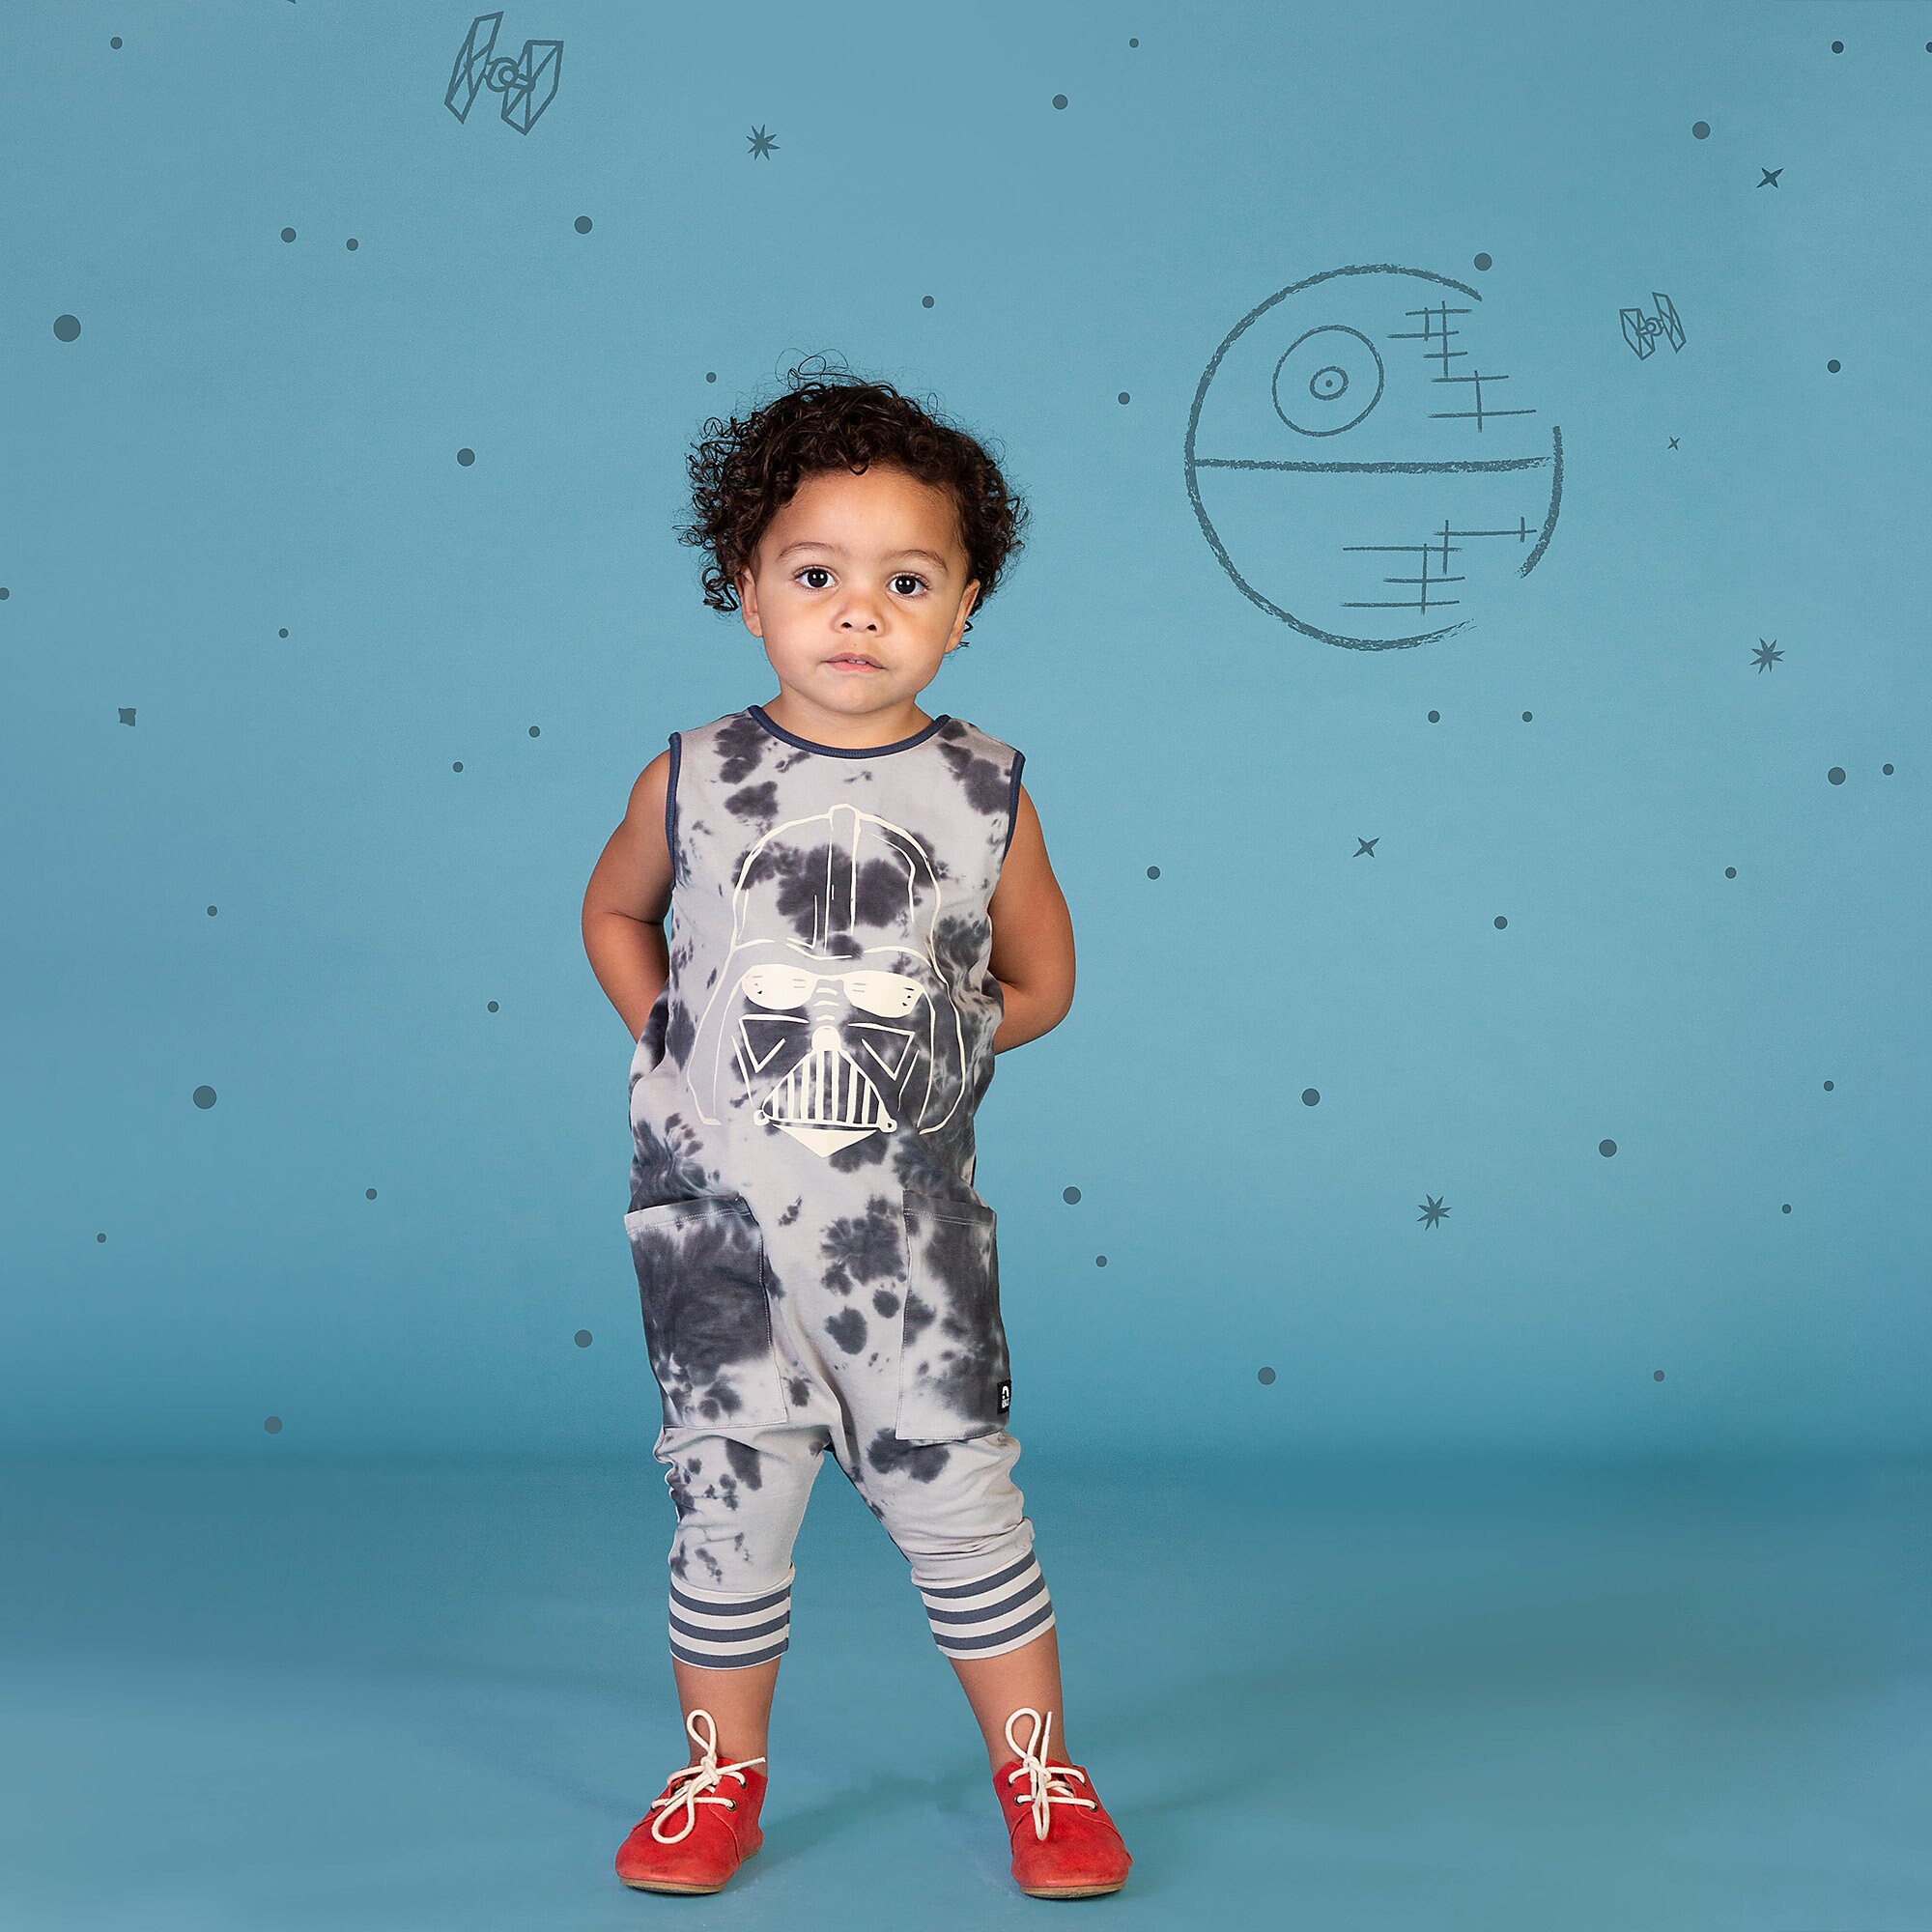 Darth Vader Romper Tank for Baby and Toddler by Rags